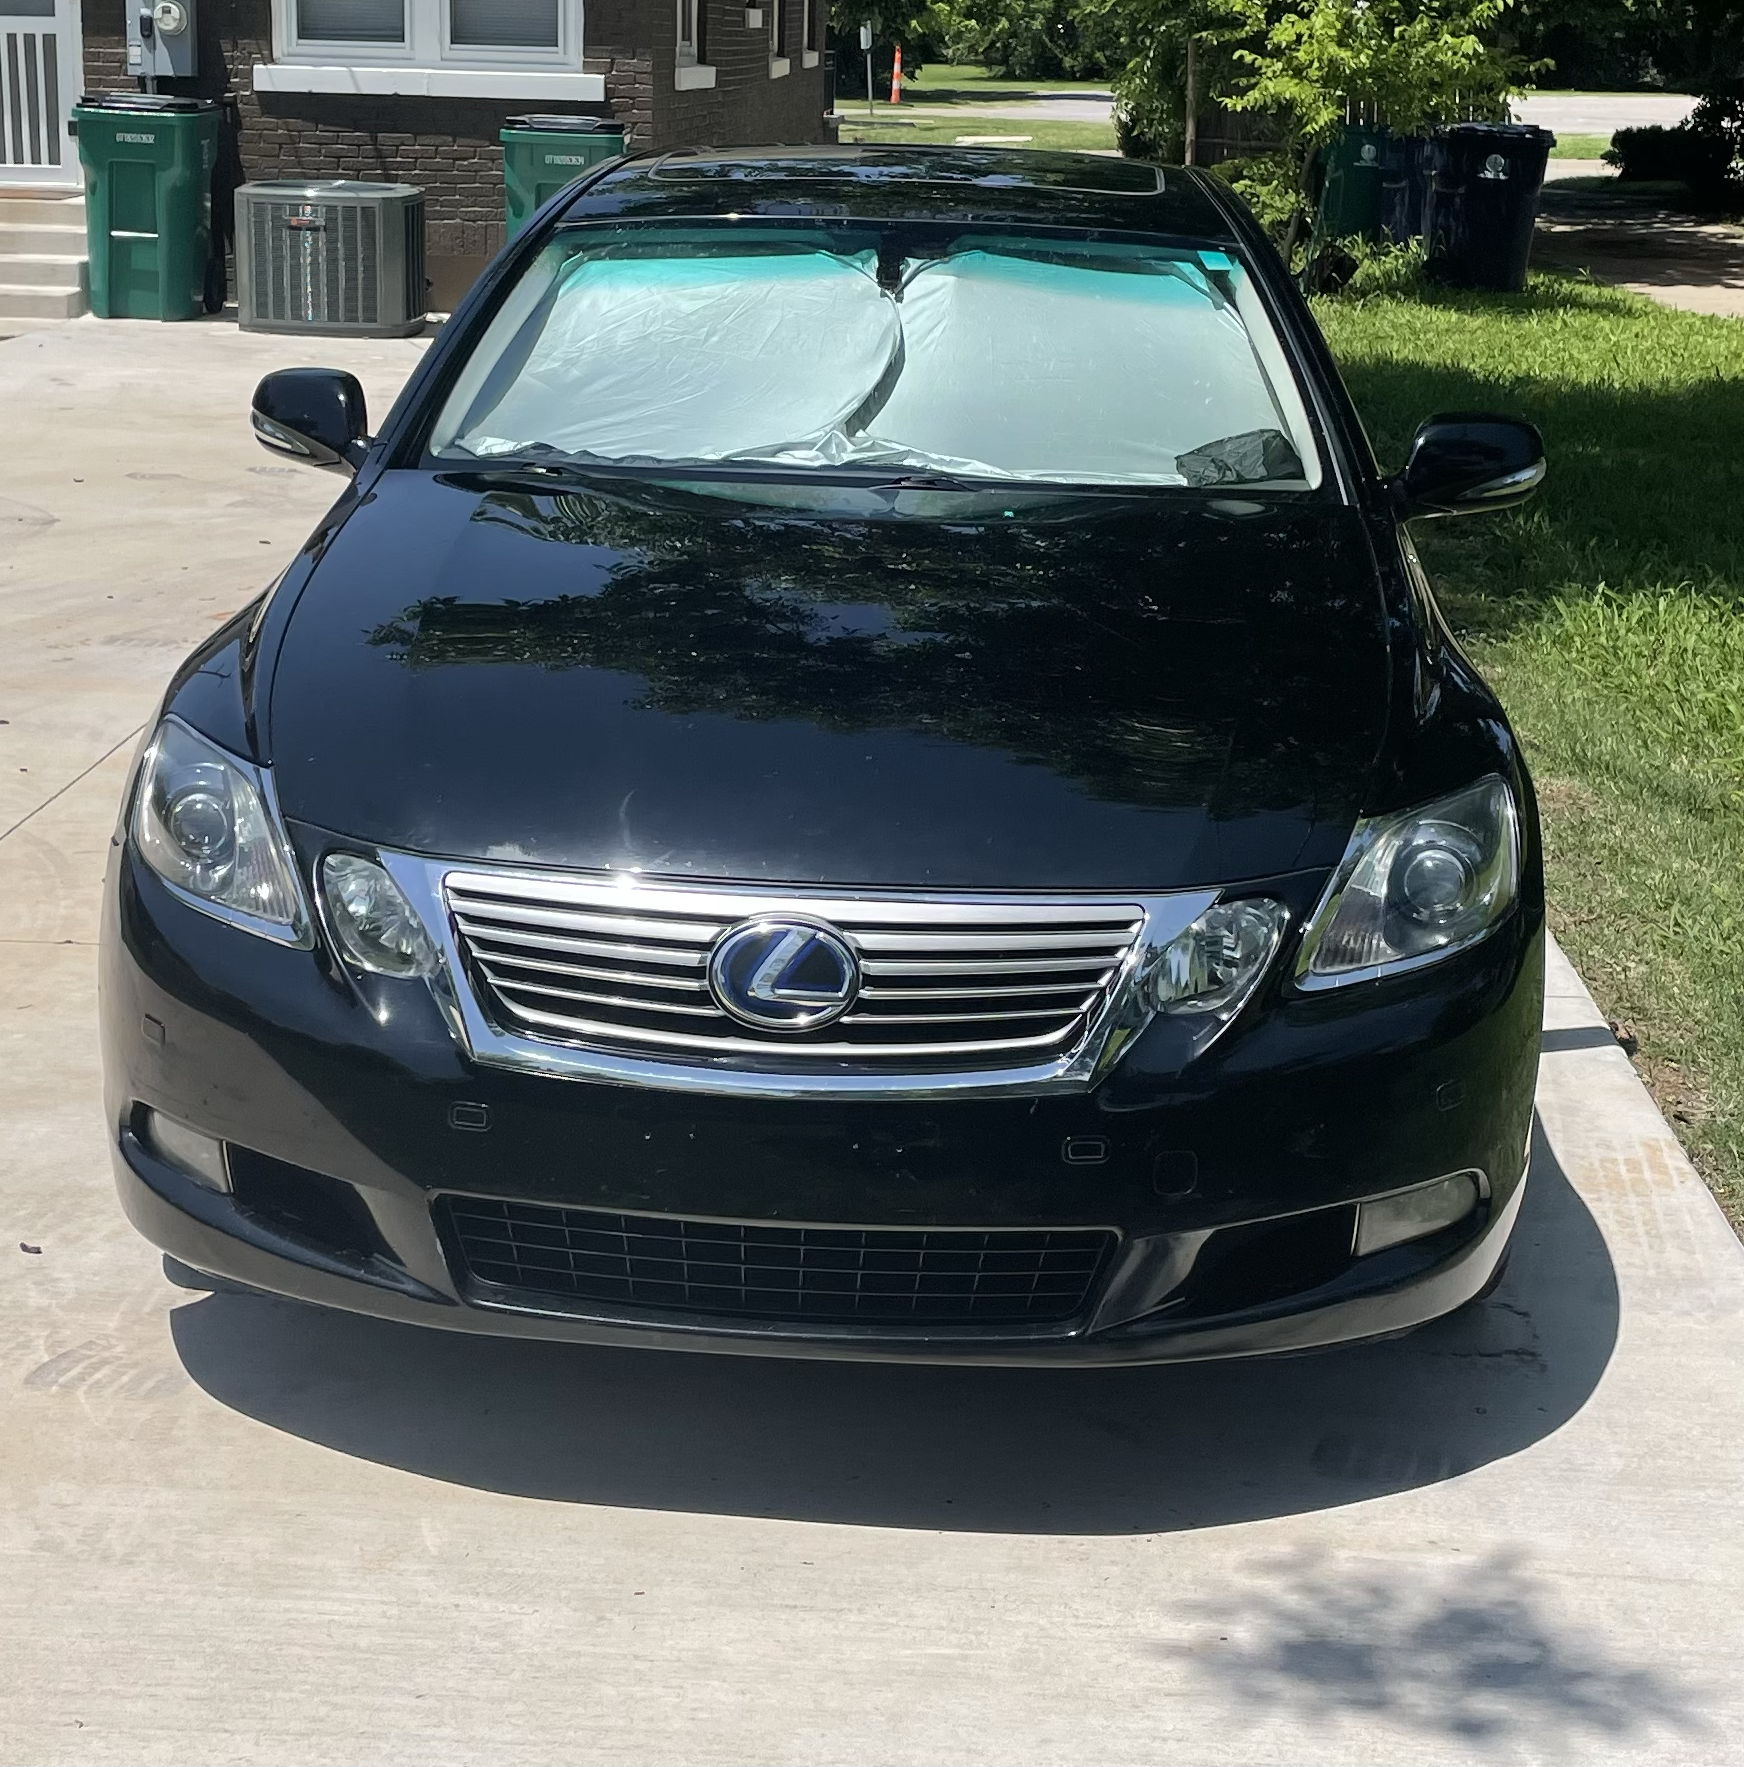 Became the owner of a 2011 Lexus GS450h a few weeks ago : r/Lexus